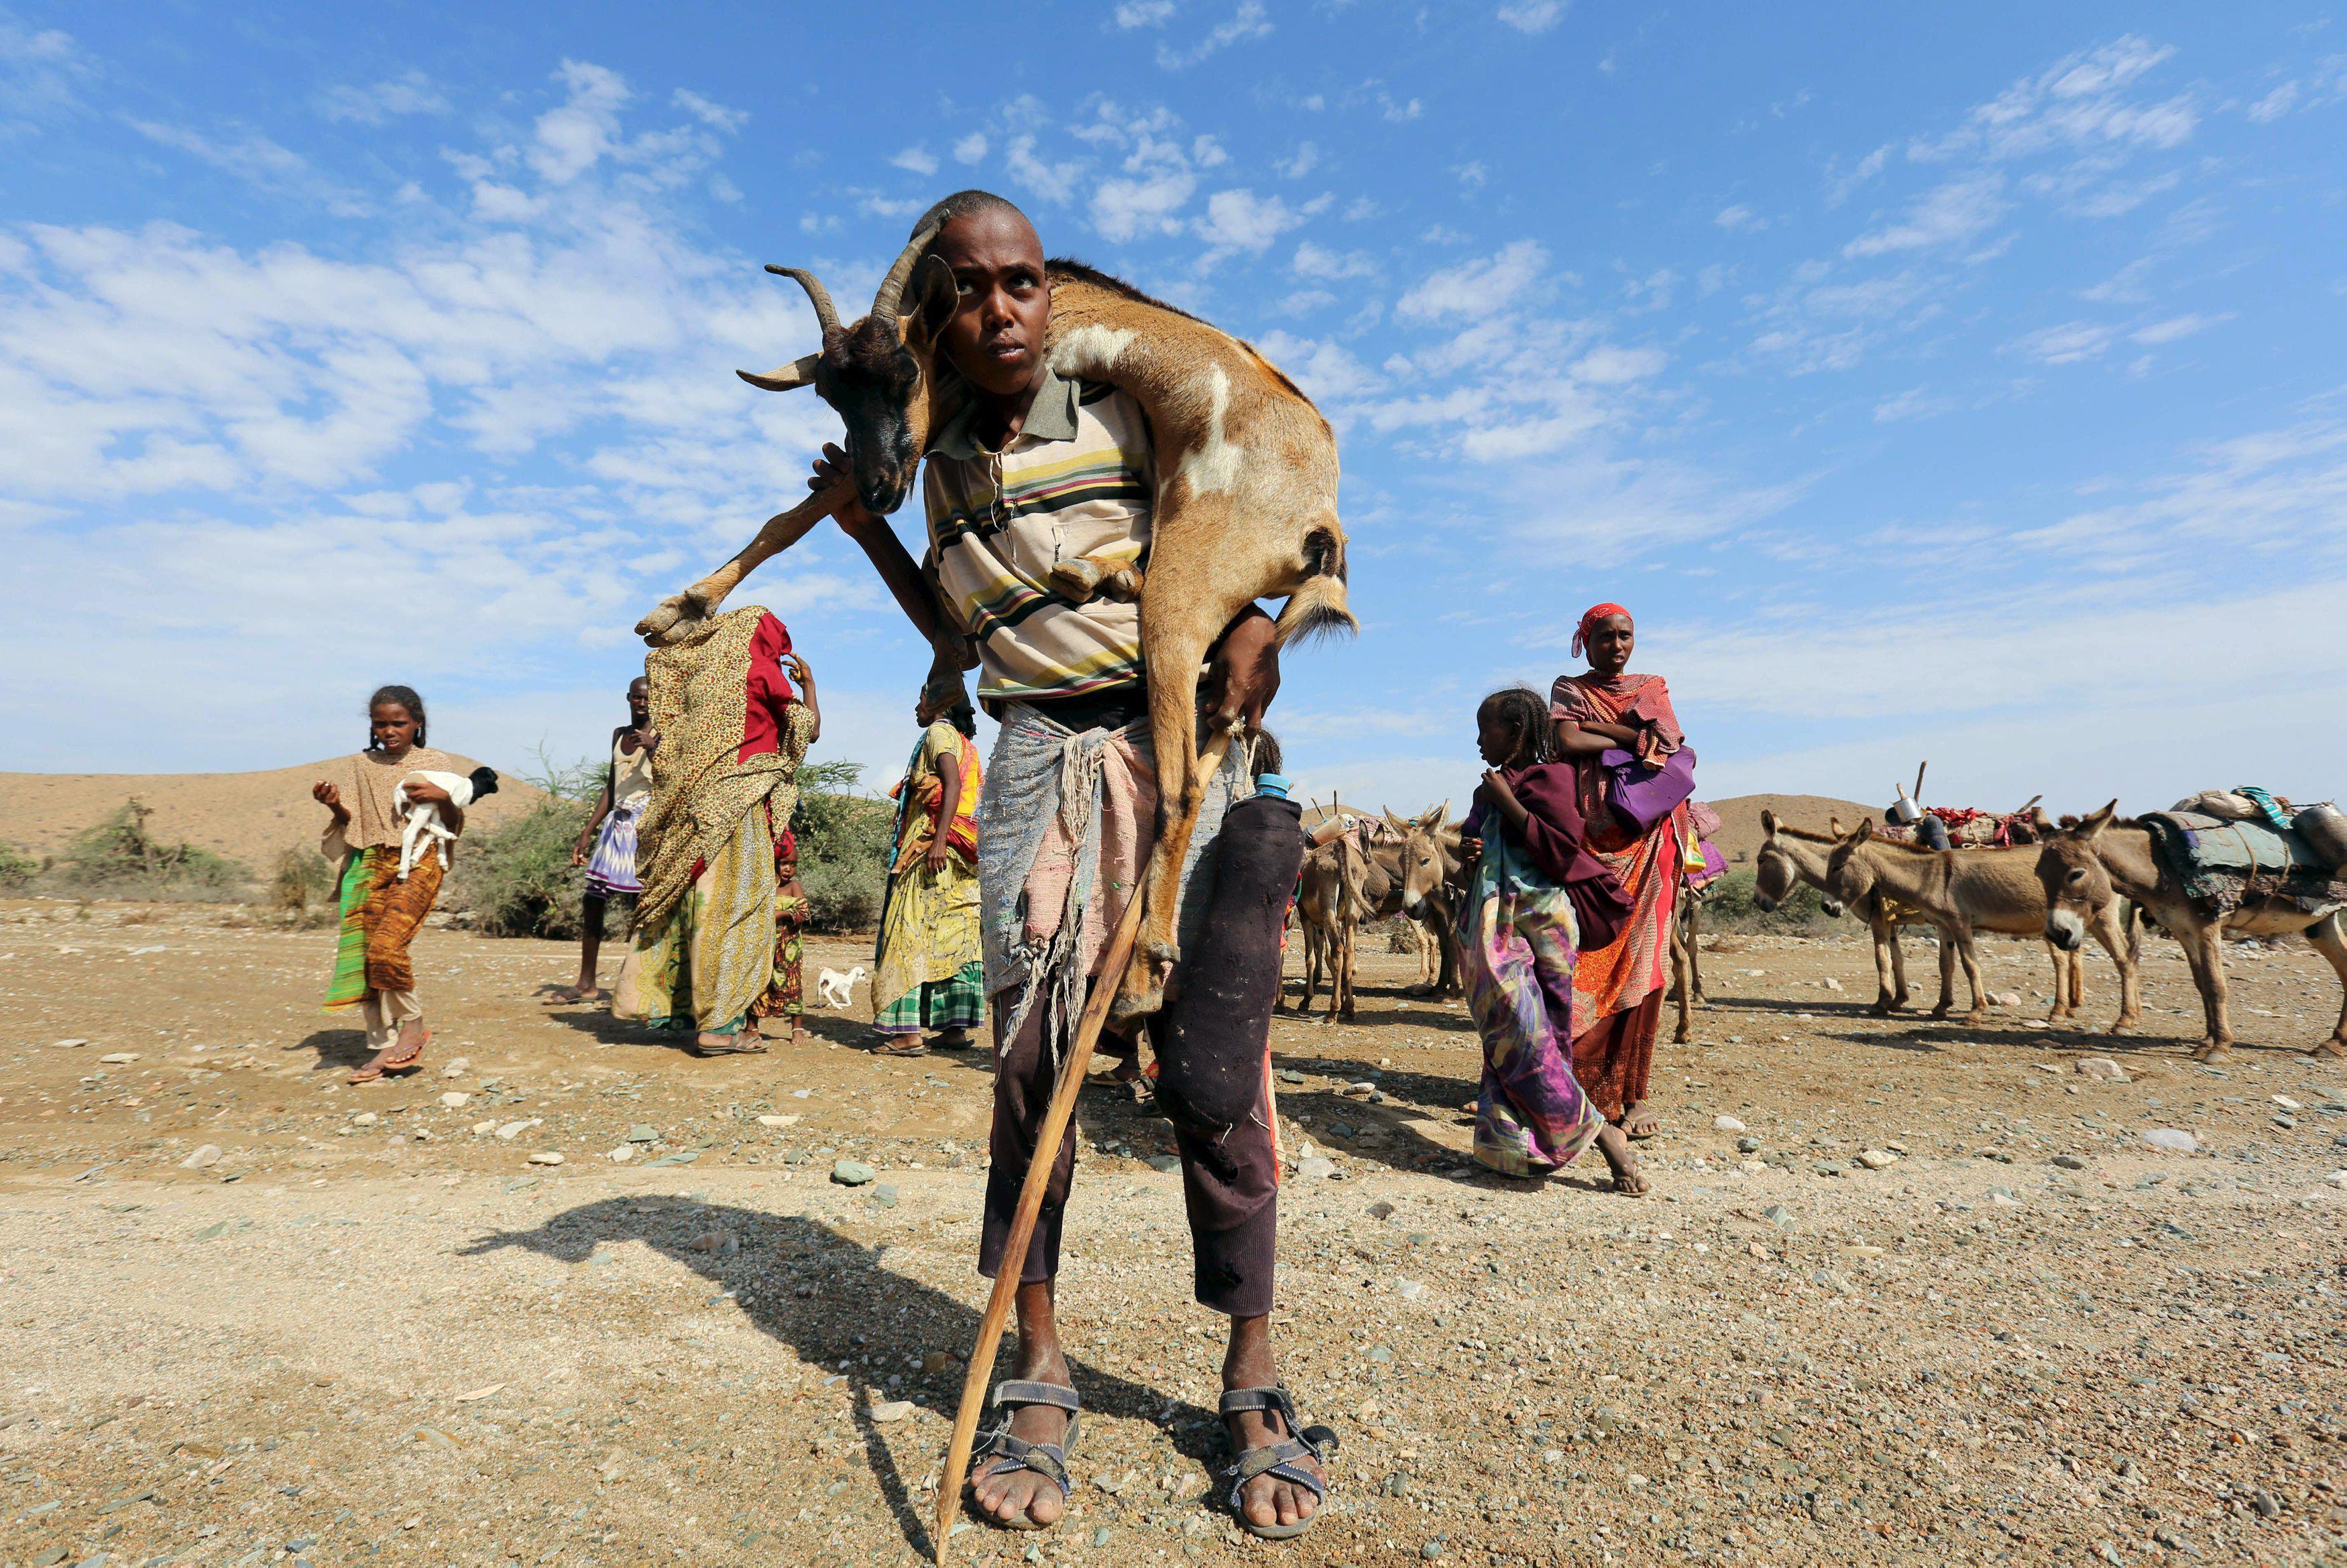 The Wider Image: Struggle for survival in Somaliland